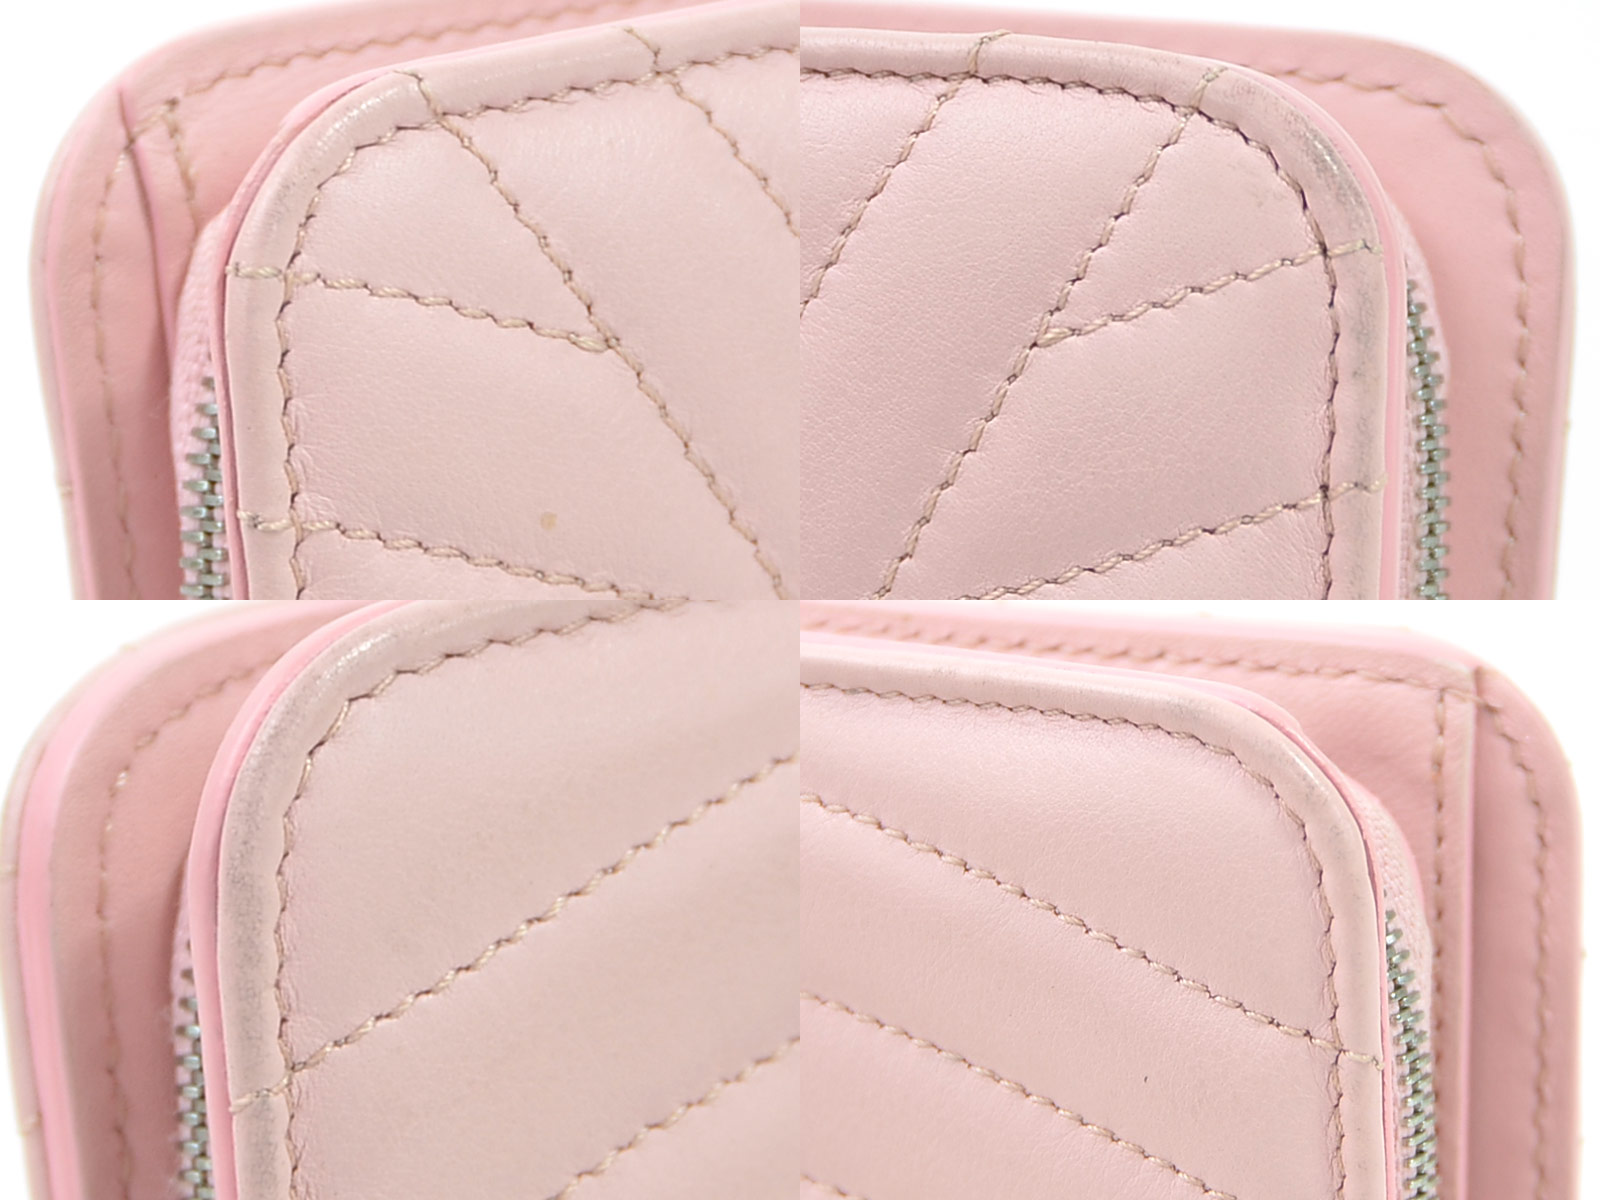 Auth Louis Vuitton New Wave Zipped Compact Wallet Pink/Silver M63791 - 97915c | eBay